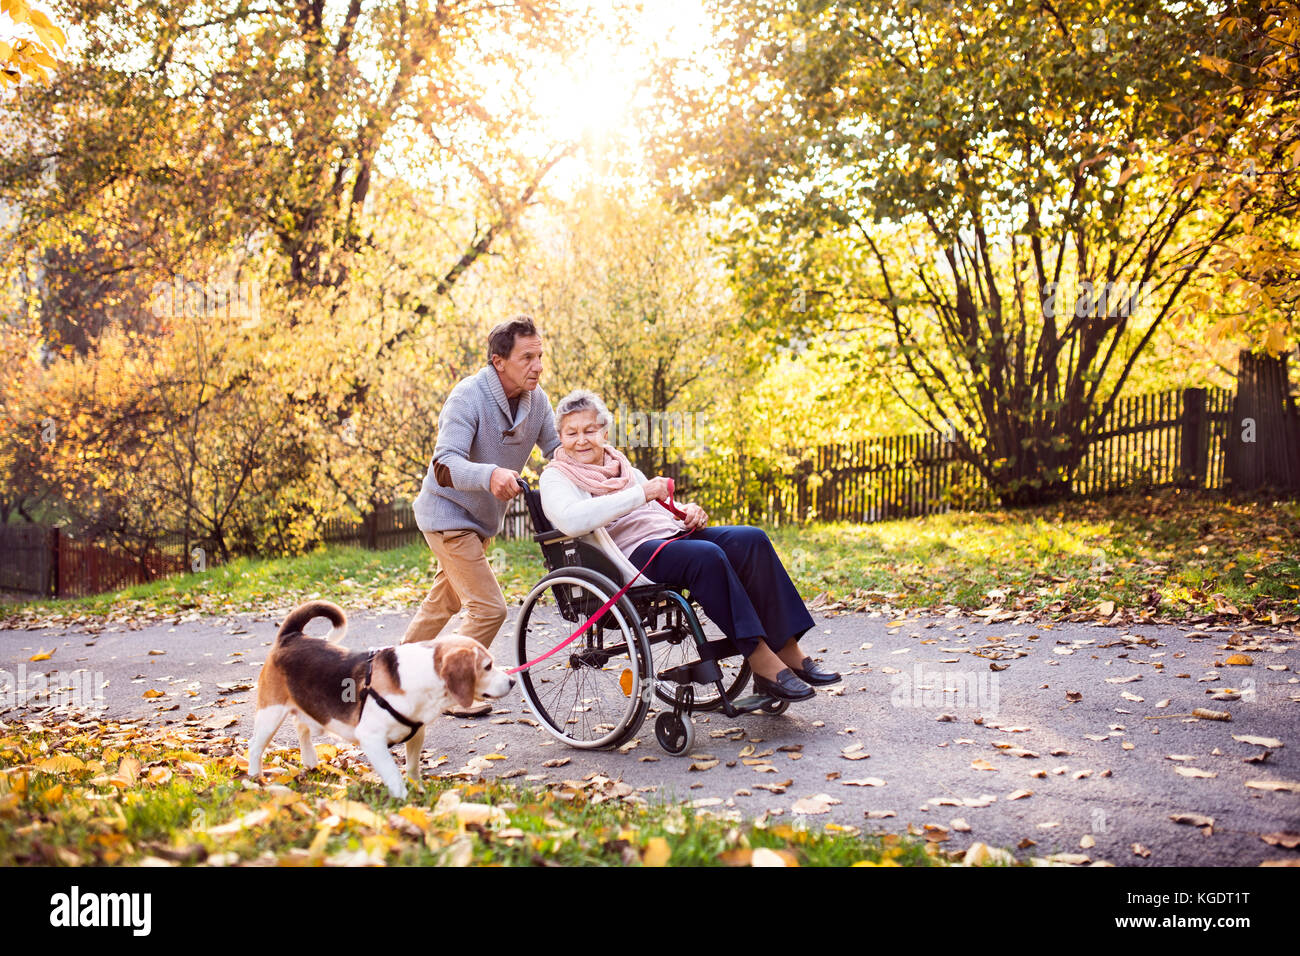 Senior man, woman in wheelchair and dog in autumn nature. Stock Photo